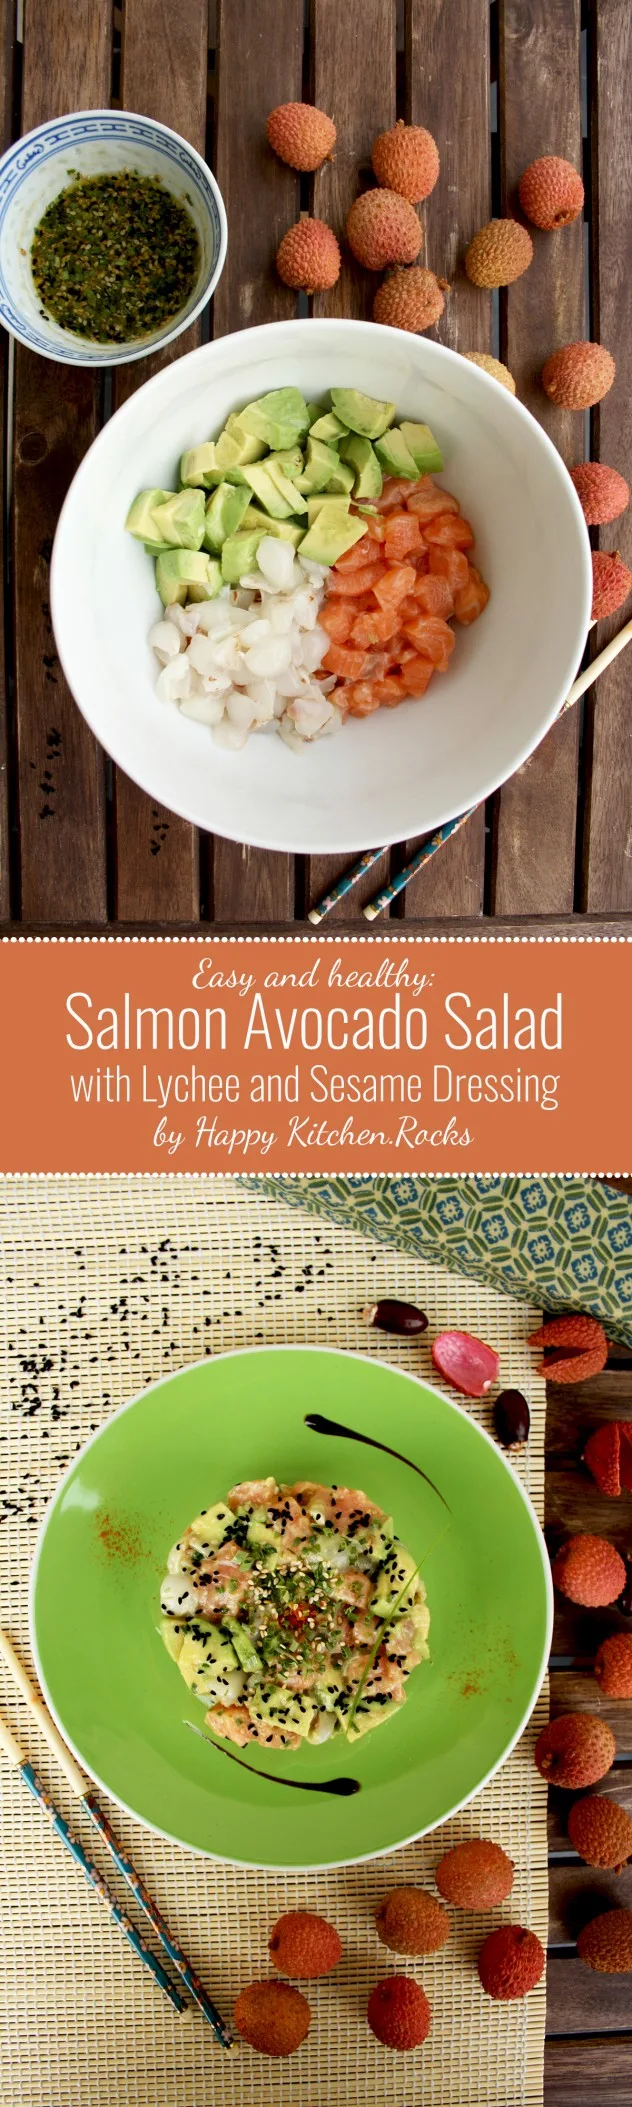 Salmon Avocado Salad with Lychee and Sesame Dressing: Easy, healthy, delicious and fancy salad. Asian classic with a sweet seasonal spin.